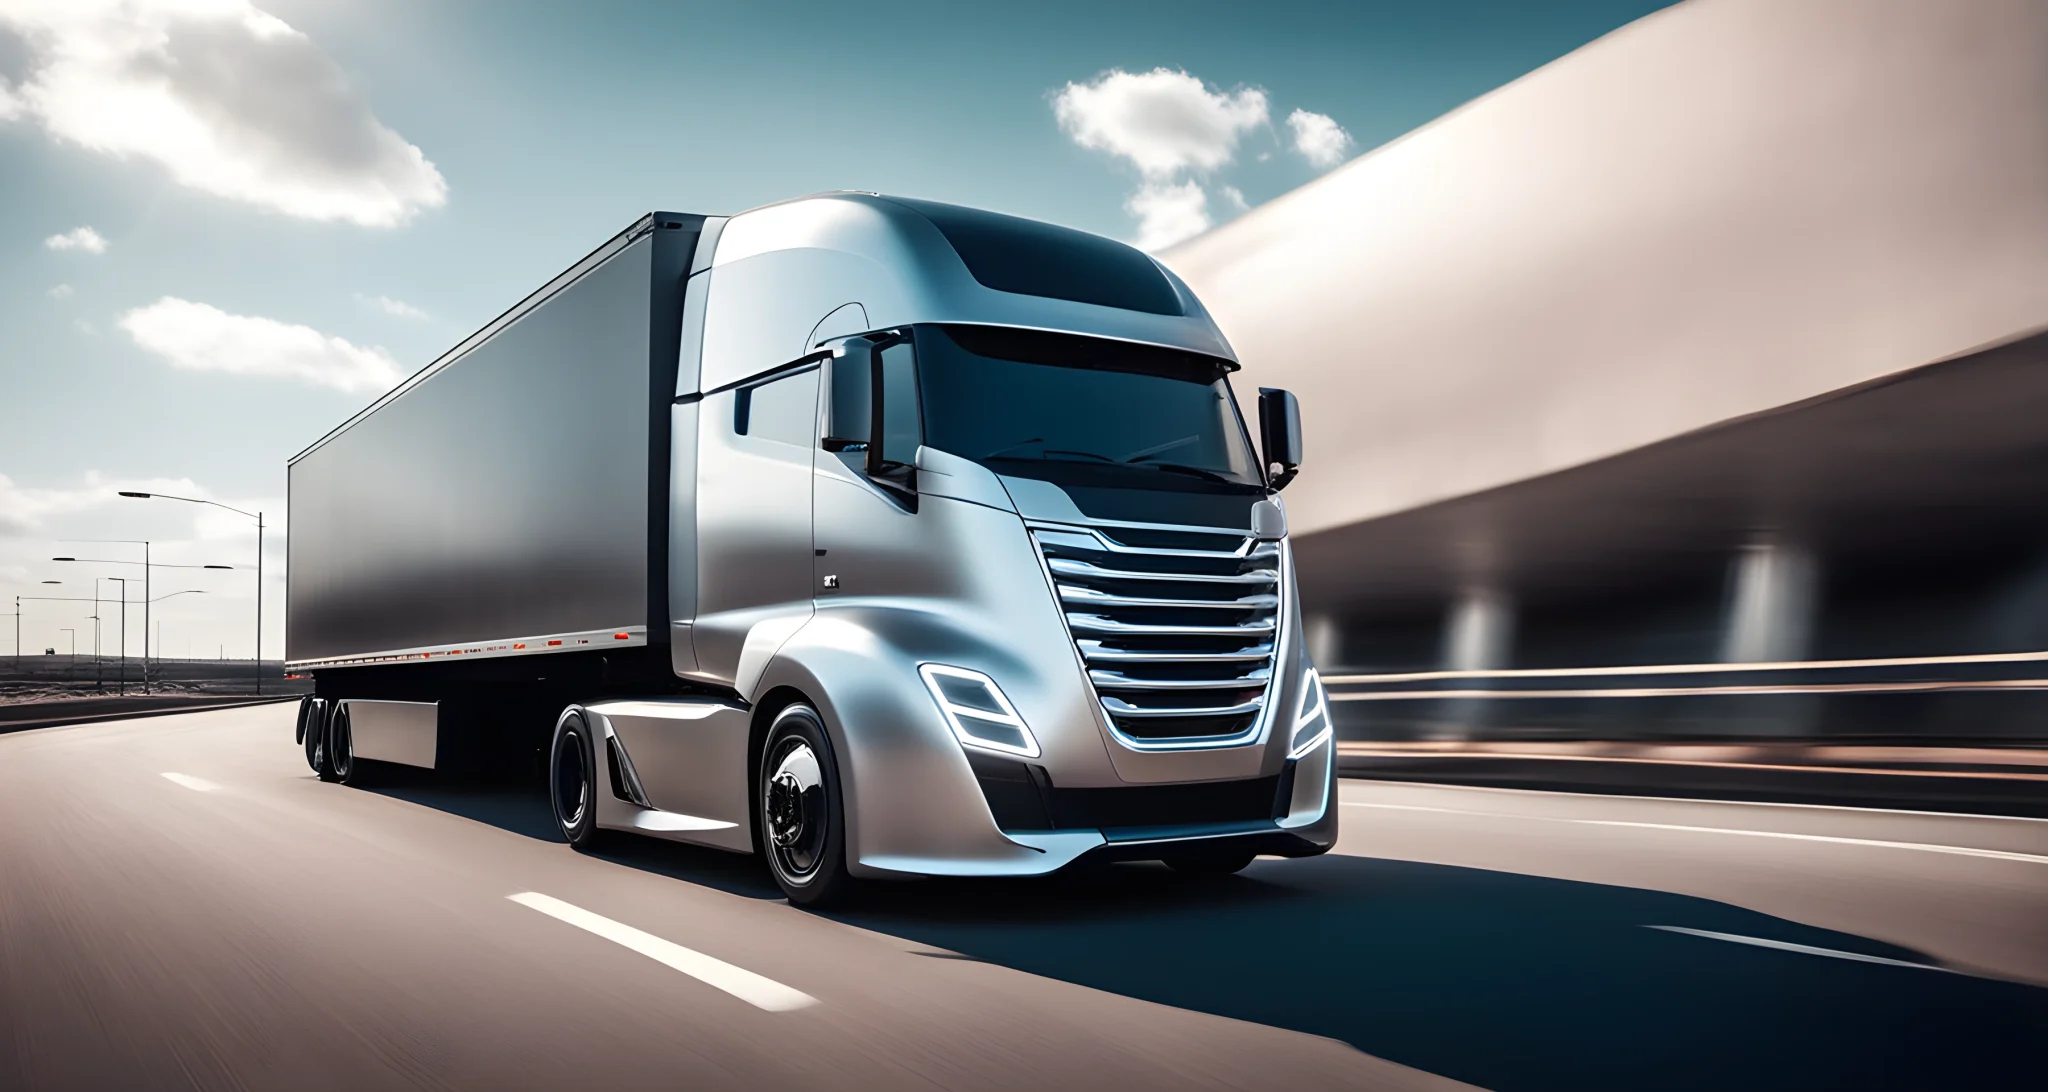 The image shows a large electric heavy-duty truck on a highway, with a futuristic design and a sleek exterior.